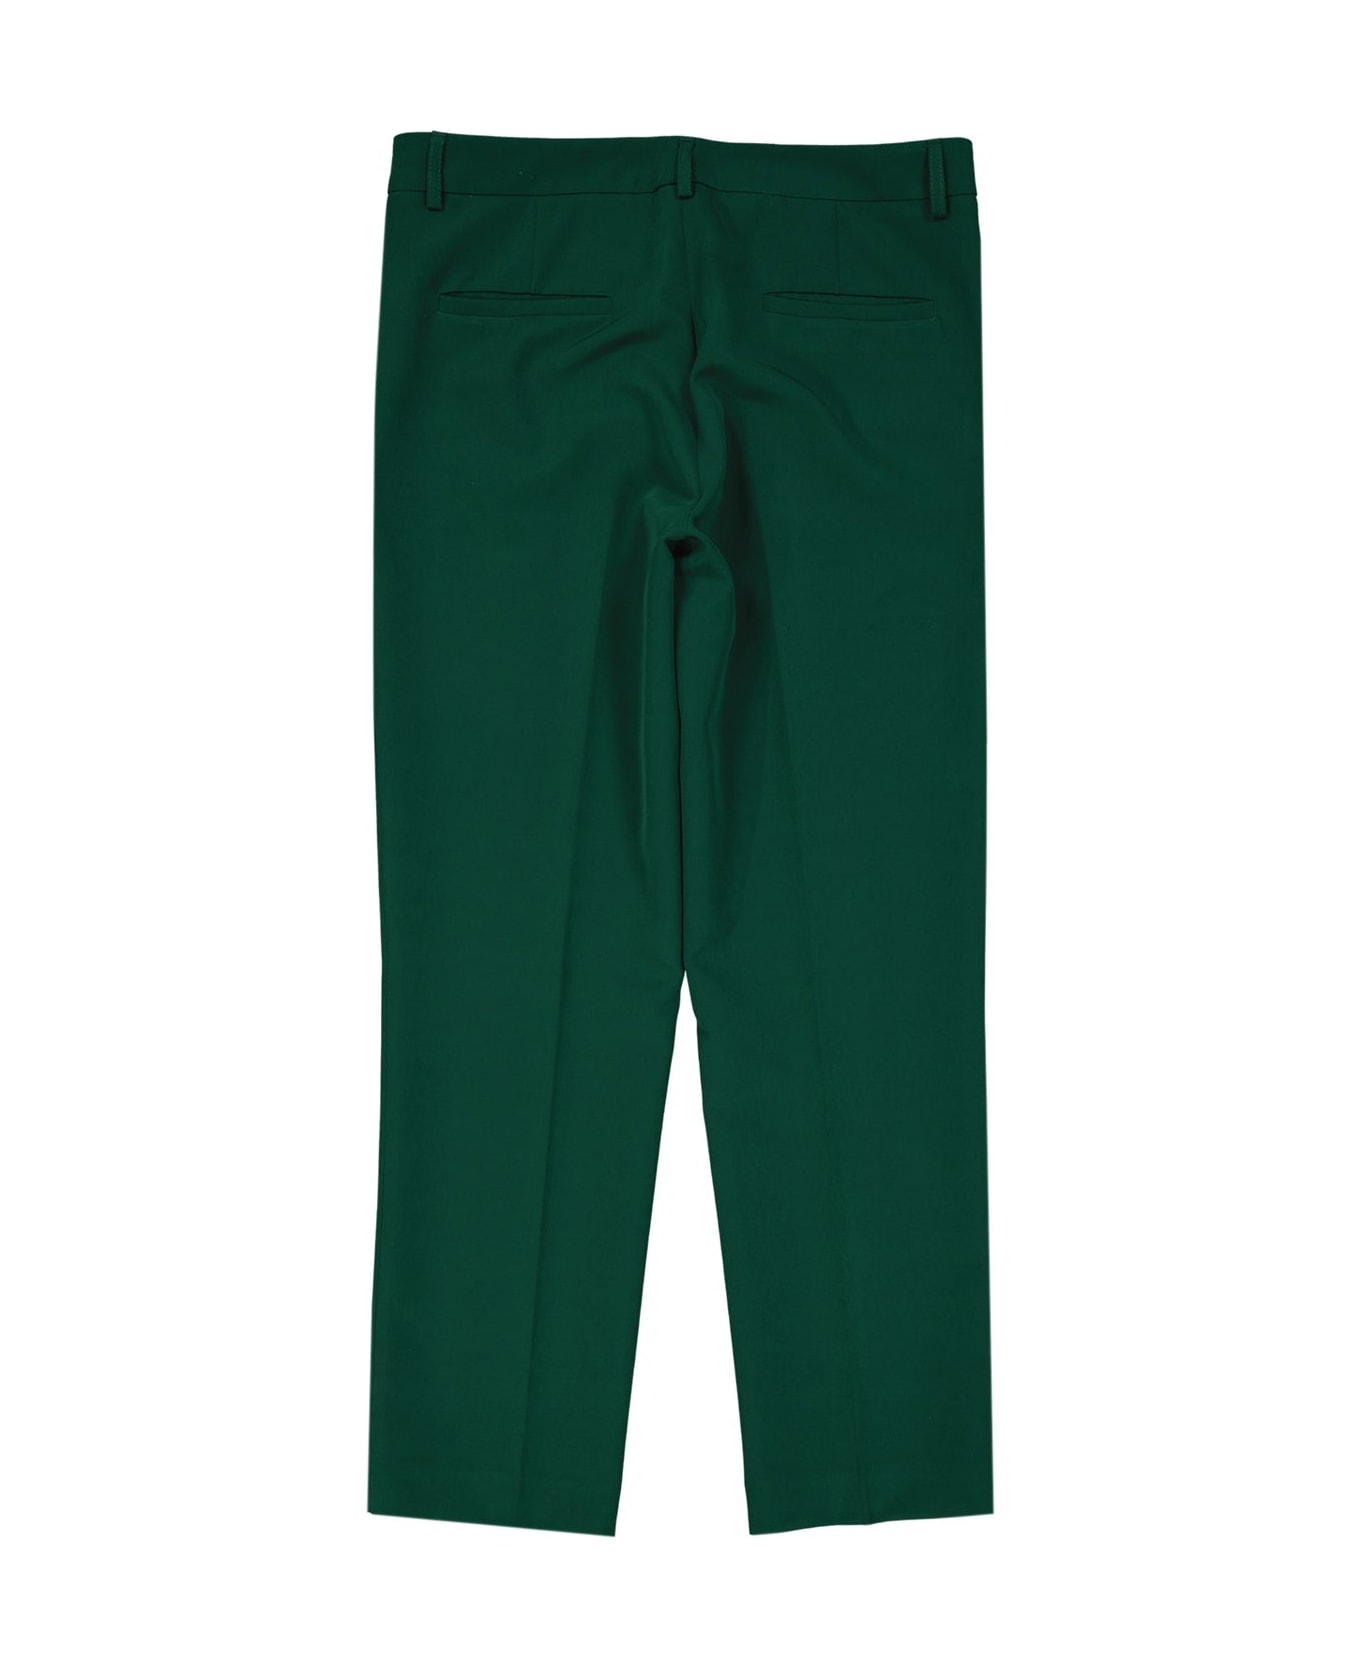 Blanca Vita Cropped Tailored Trousers - Green